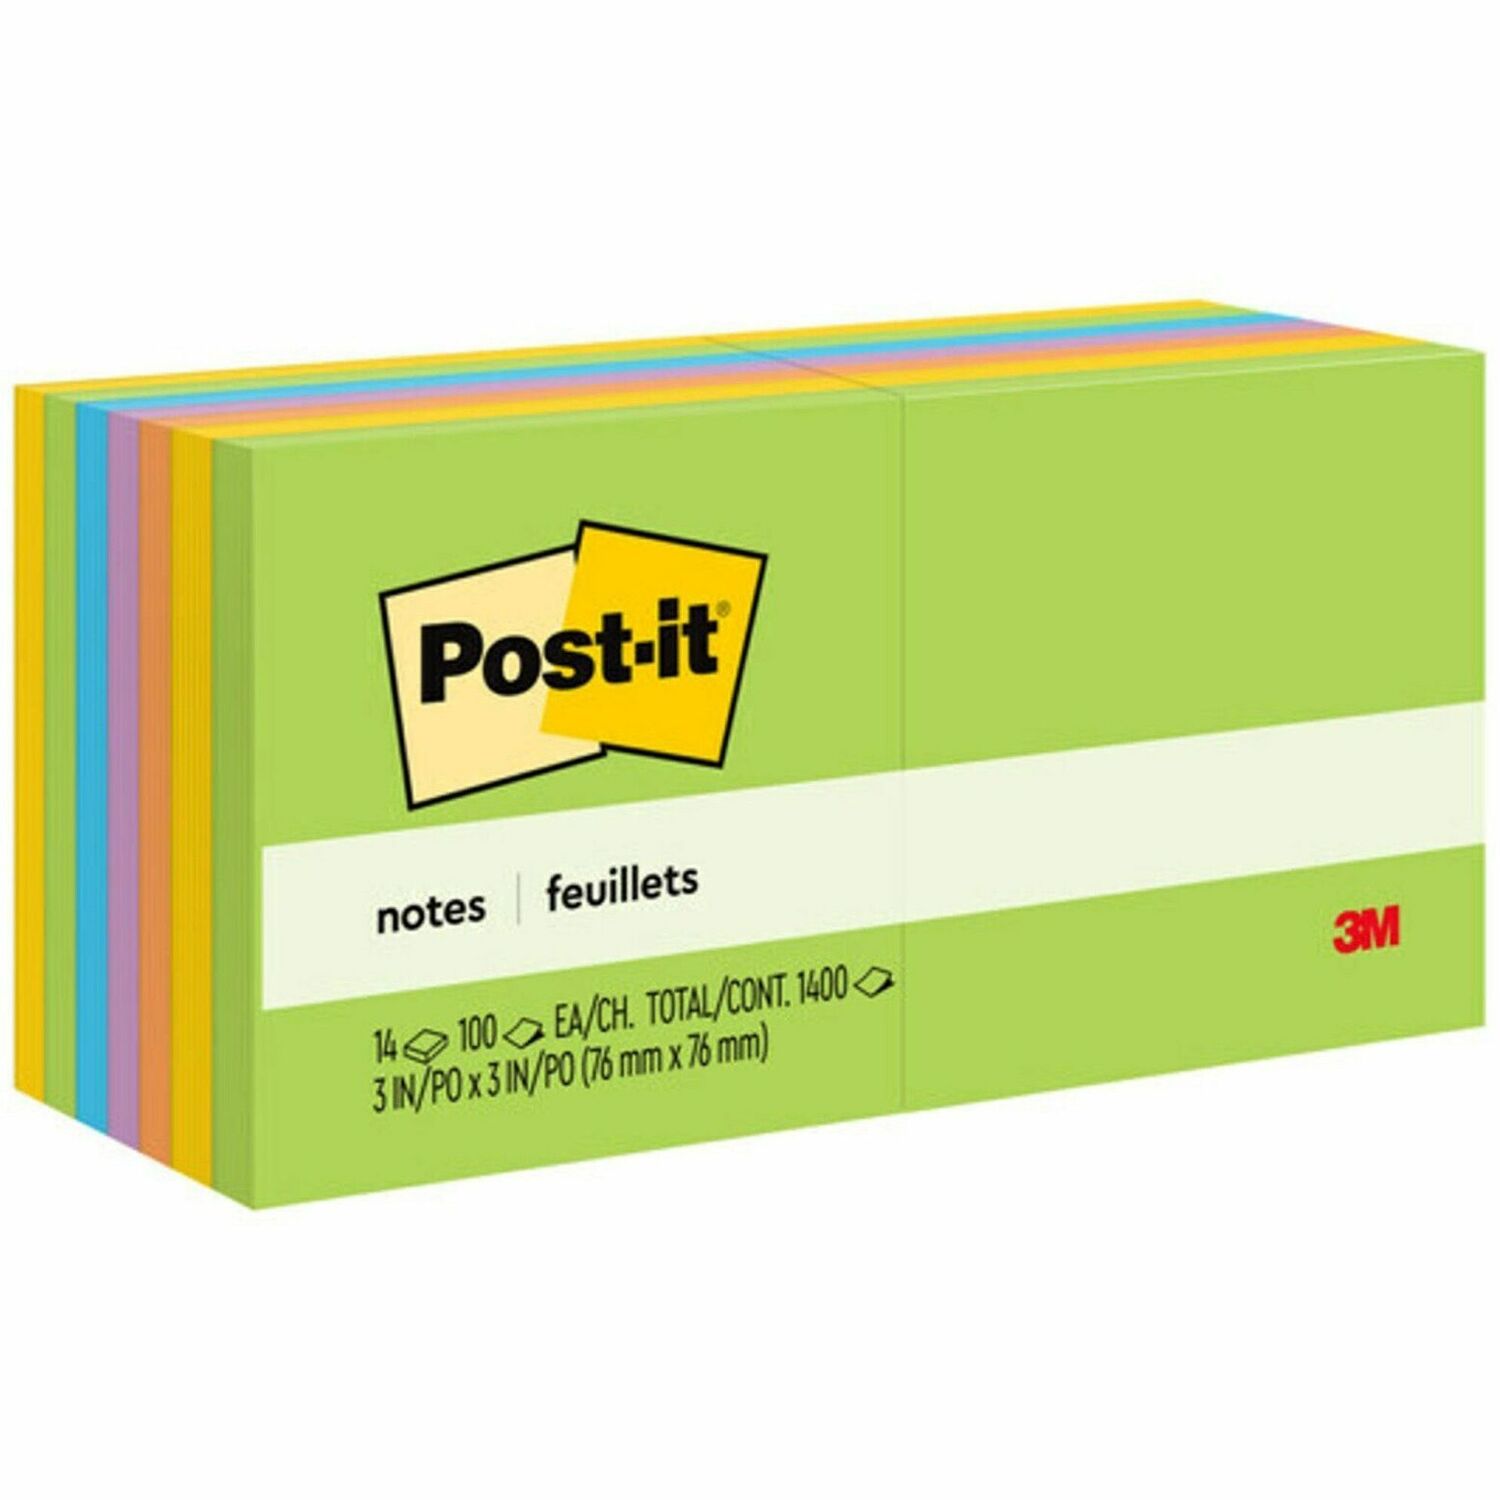 Post-it Mini Notes, 1 3/8 in x 1 7/8 in, 18 Pads, America's #1 Favorite  Sticky Notes, Poptimistic Collection, Bright Colors (Blue, Orange, Pink